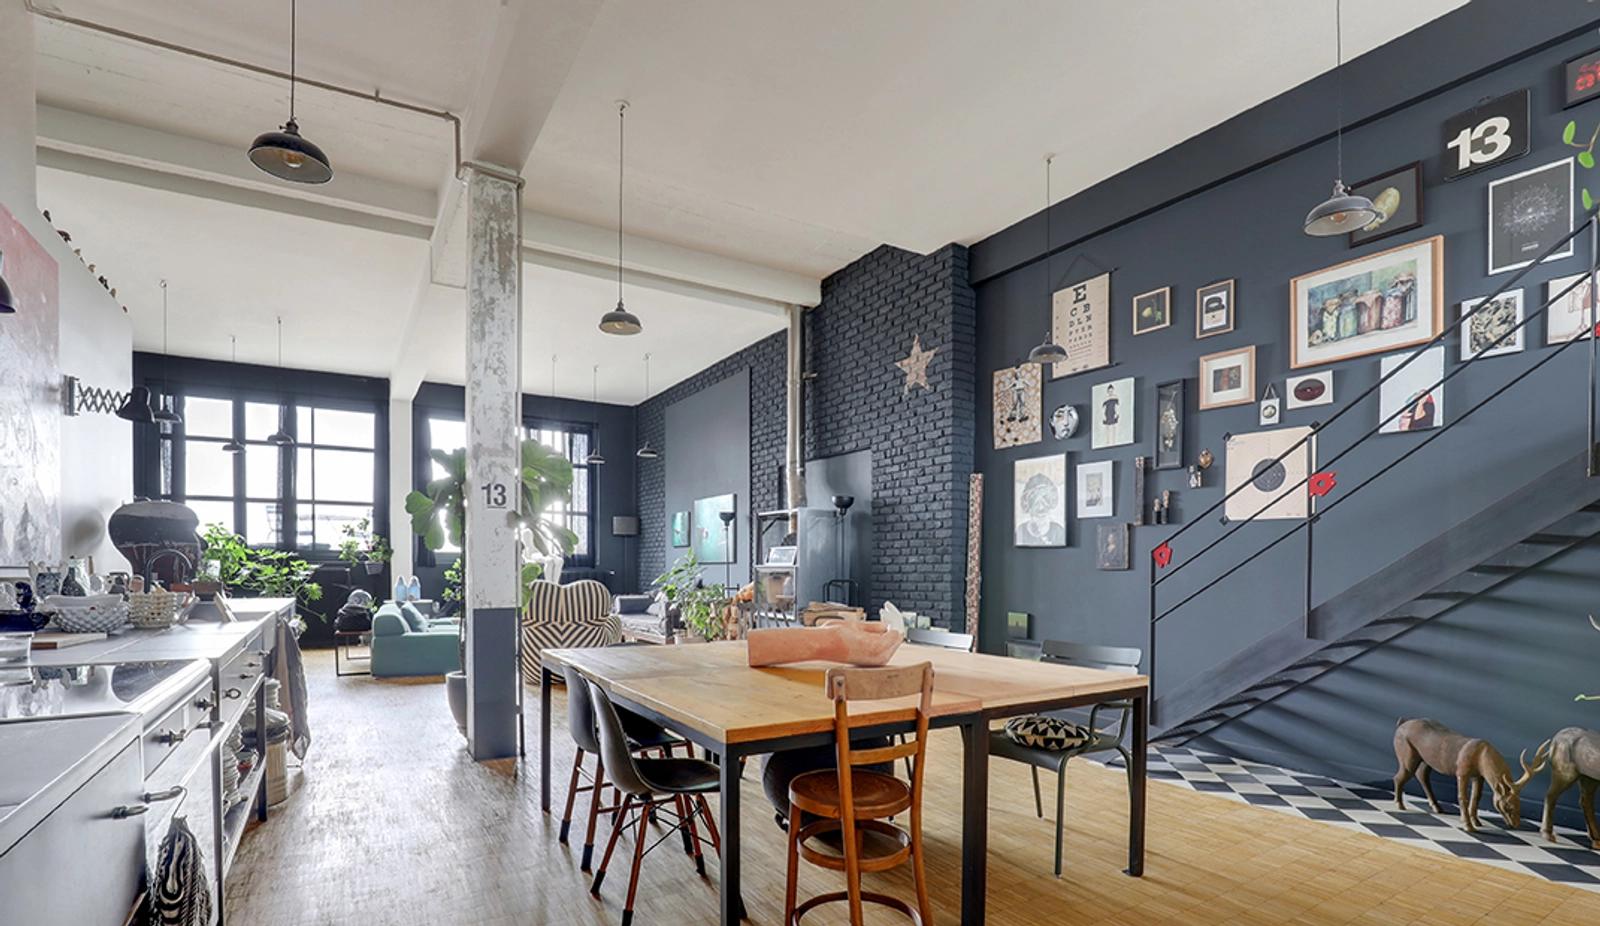 Space Spacious and bright arty loft, New York style - 0